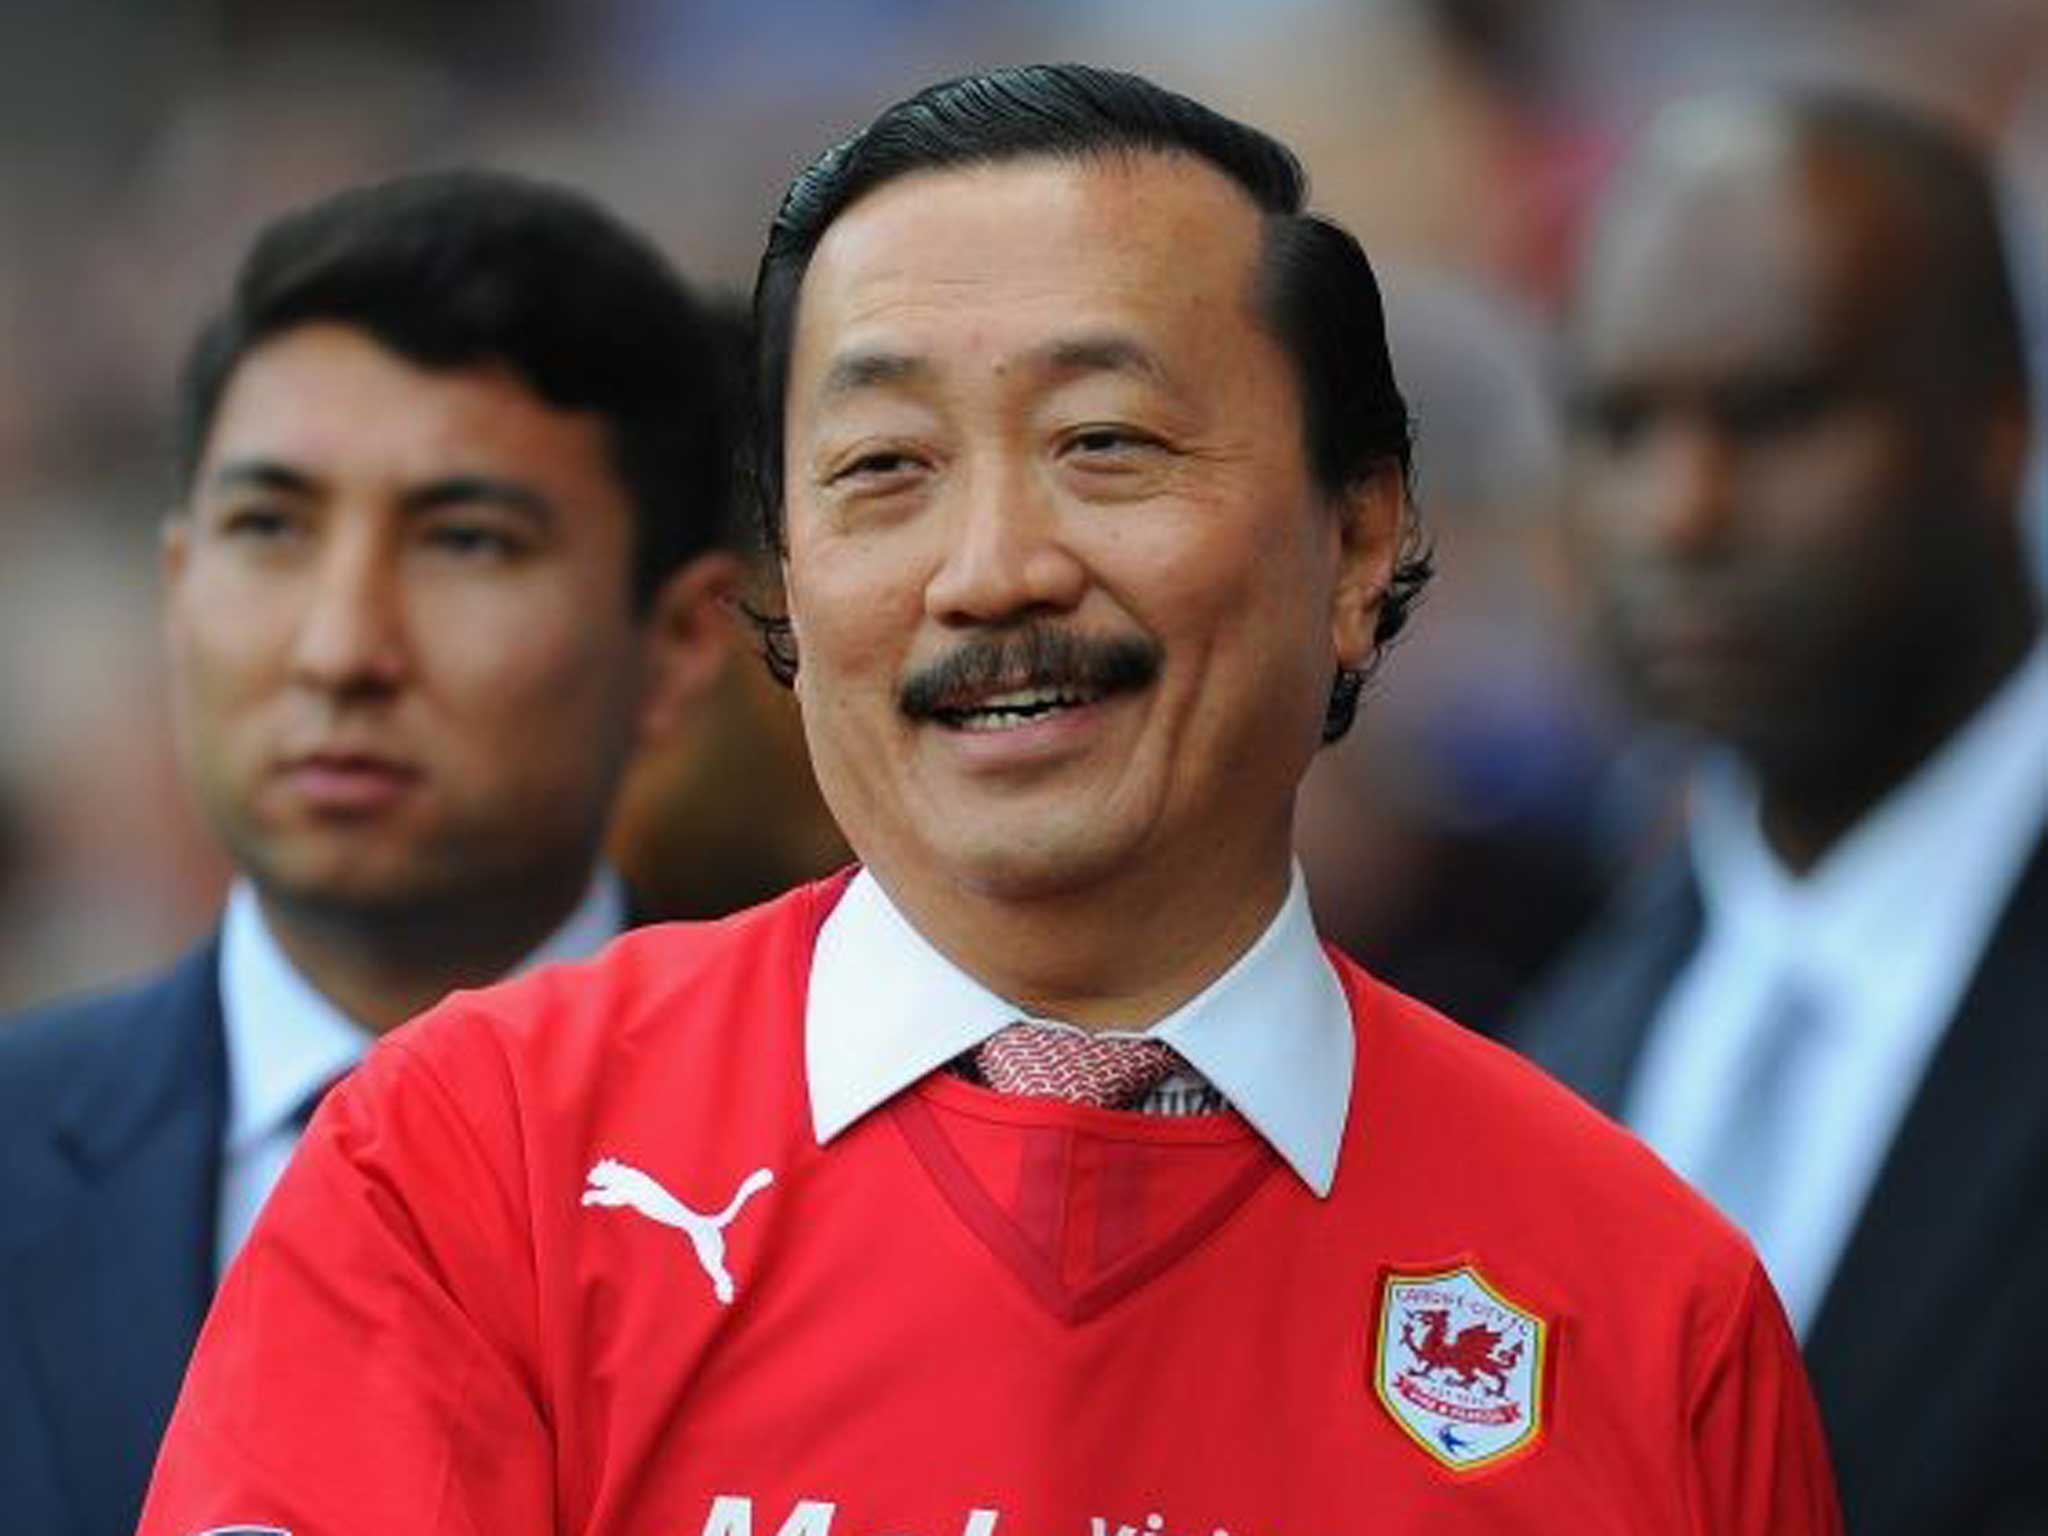 Villians
No shortage of controversial owners and chairmen; Cardiff's Vincent Tan may yet end up as one of the more villainous. On the pitch, being loyal Welsh internationals won't spare the likes of Craig Bellamy, Ashley Williams and others from dog's abu